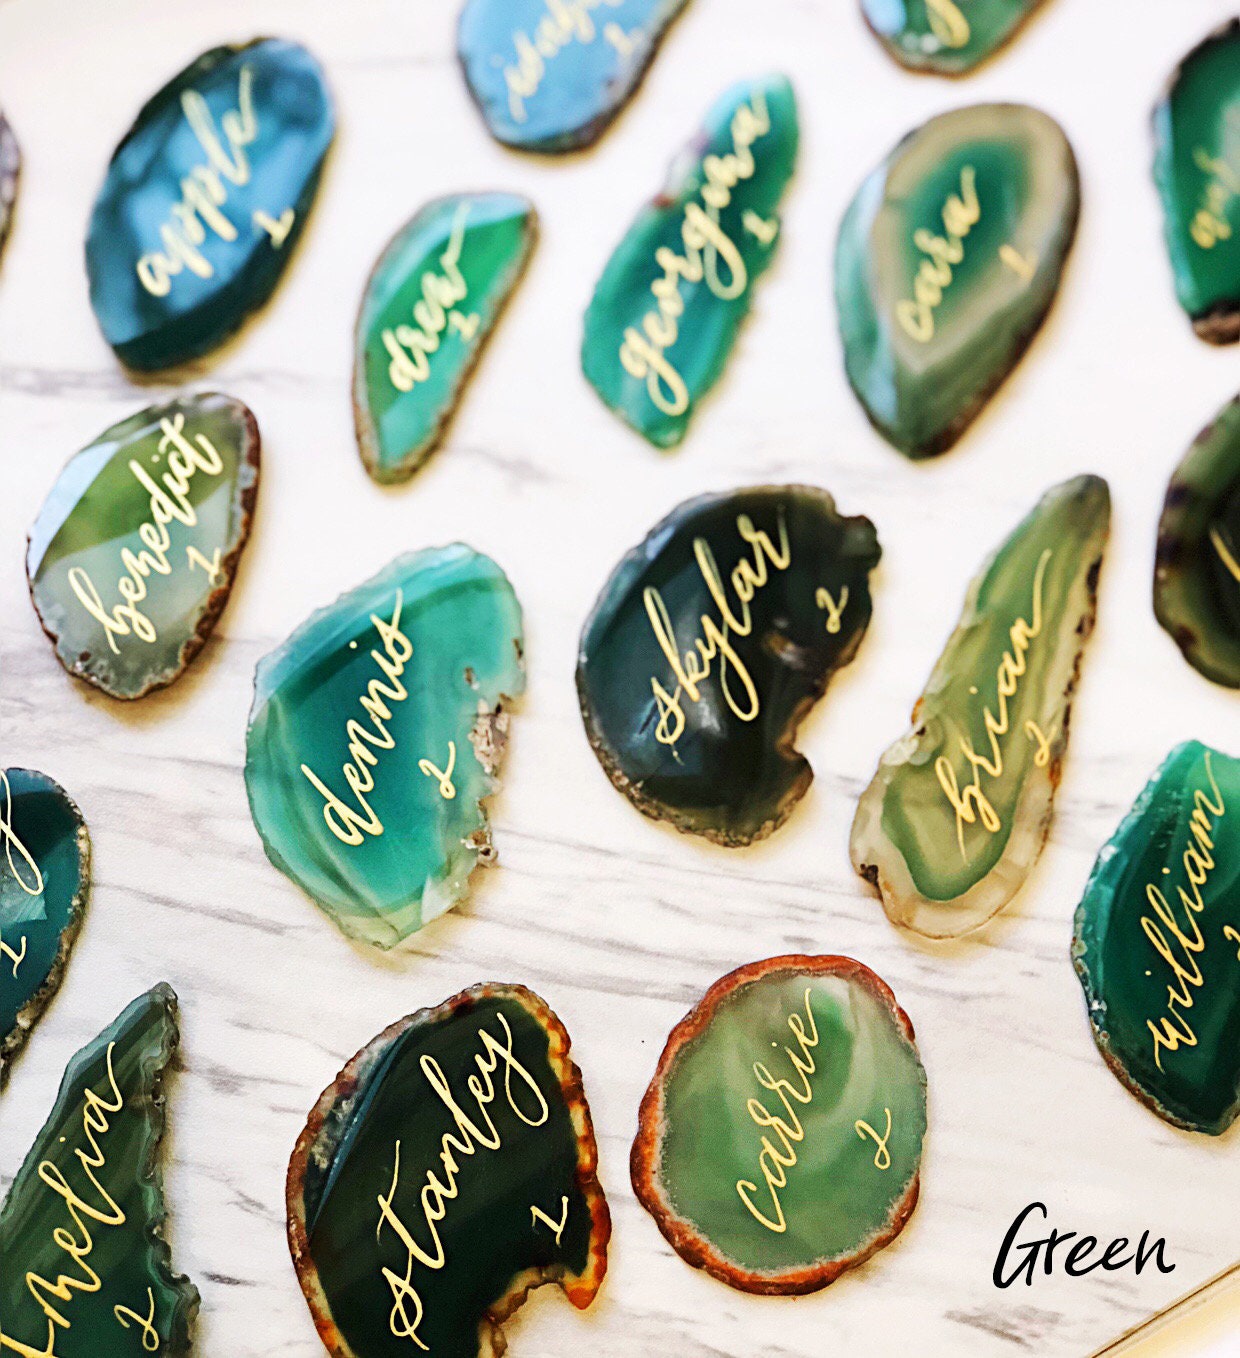 3" - 3.5" EXTRA LARGE Green  Slice Calligraphy Place Cards | Agate Slice Name Cards